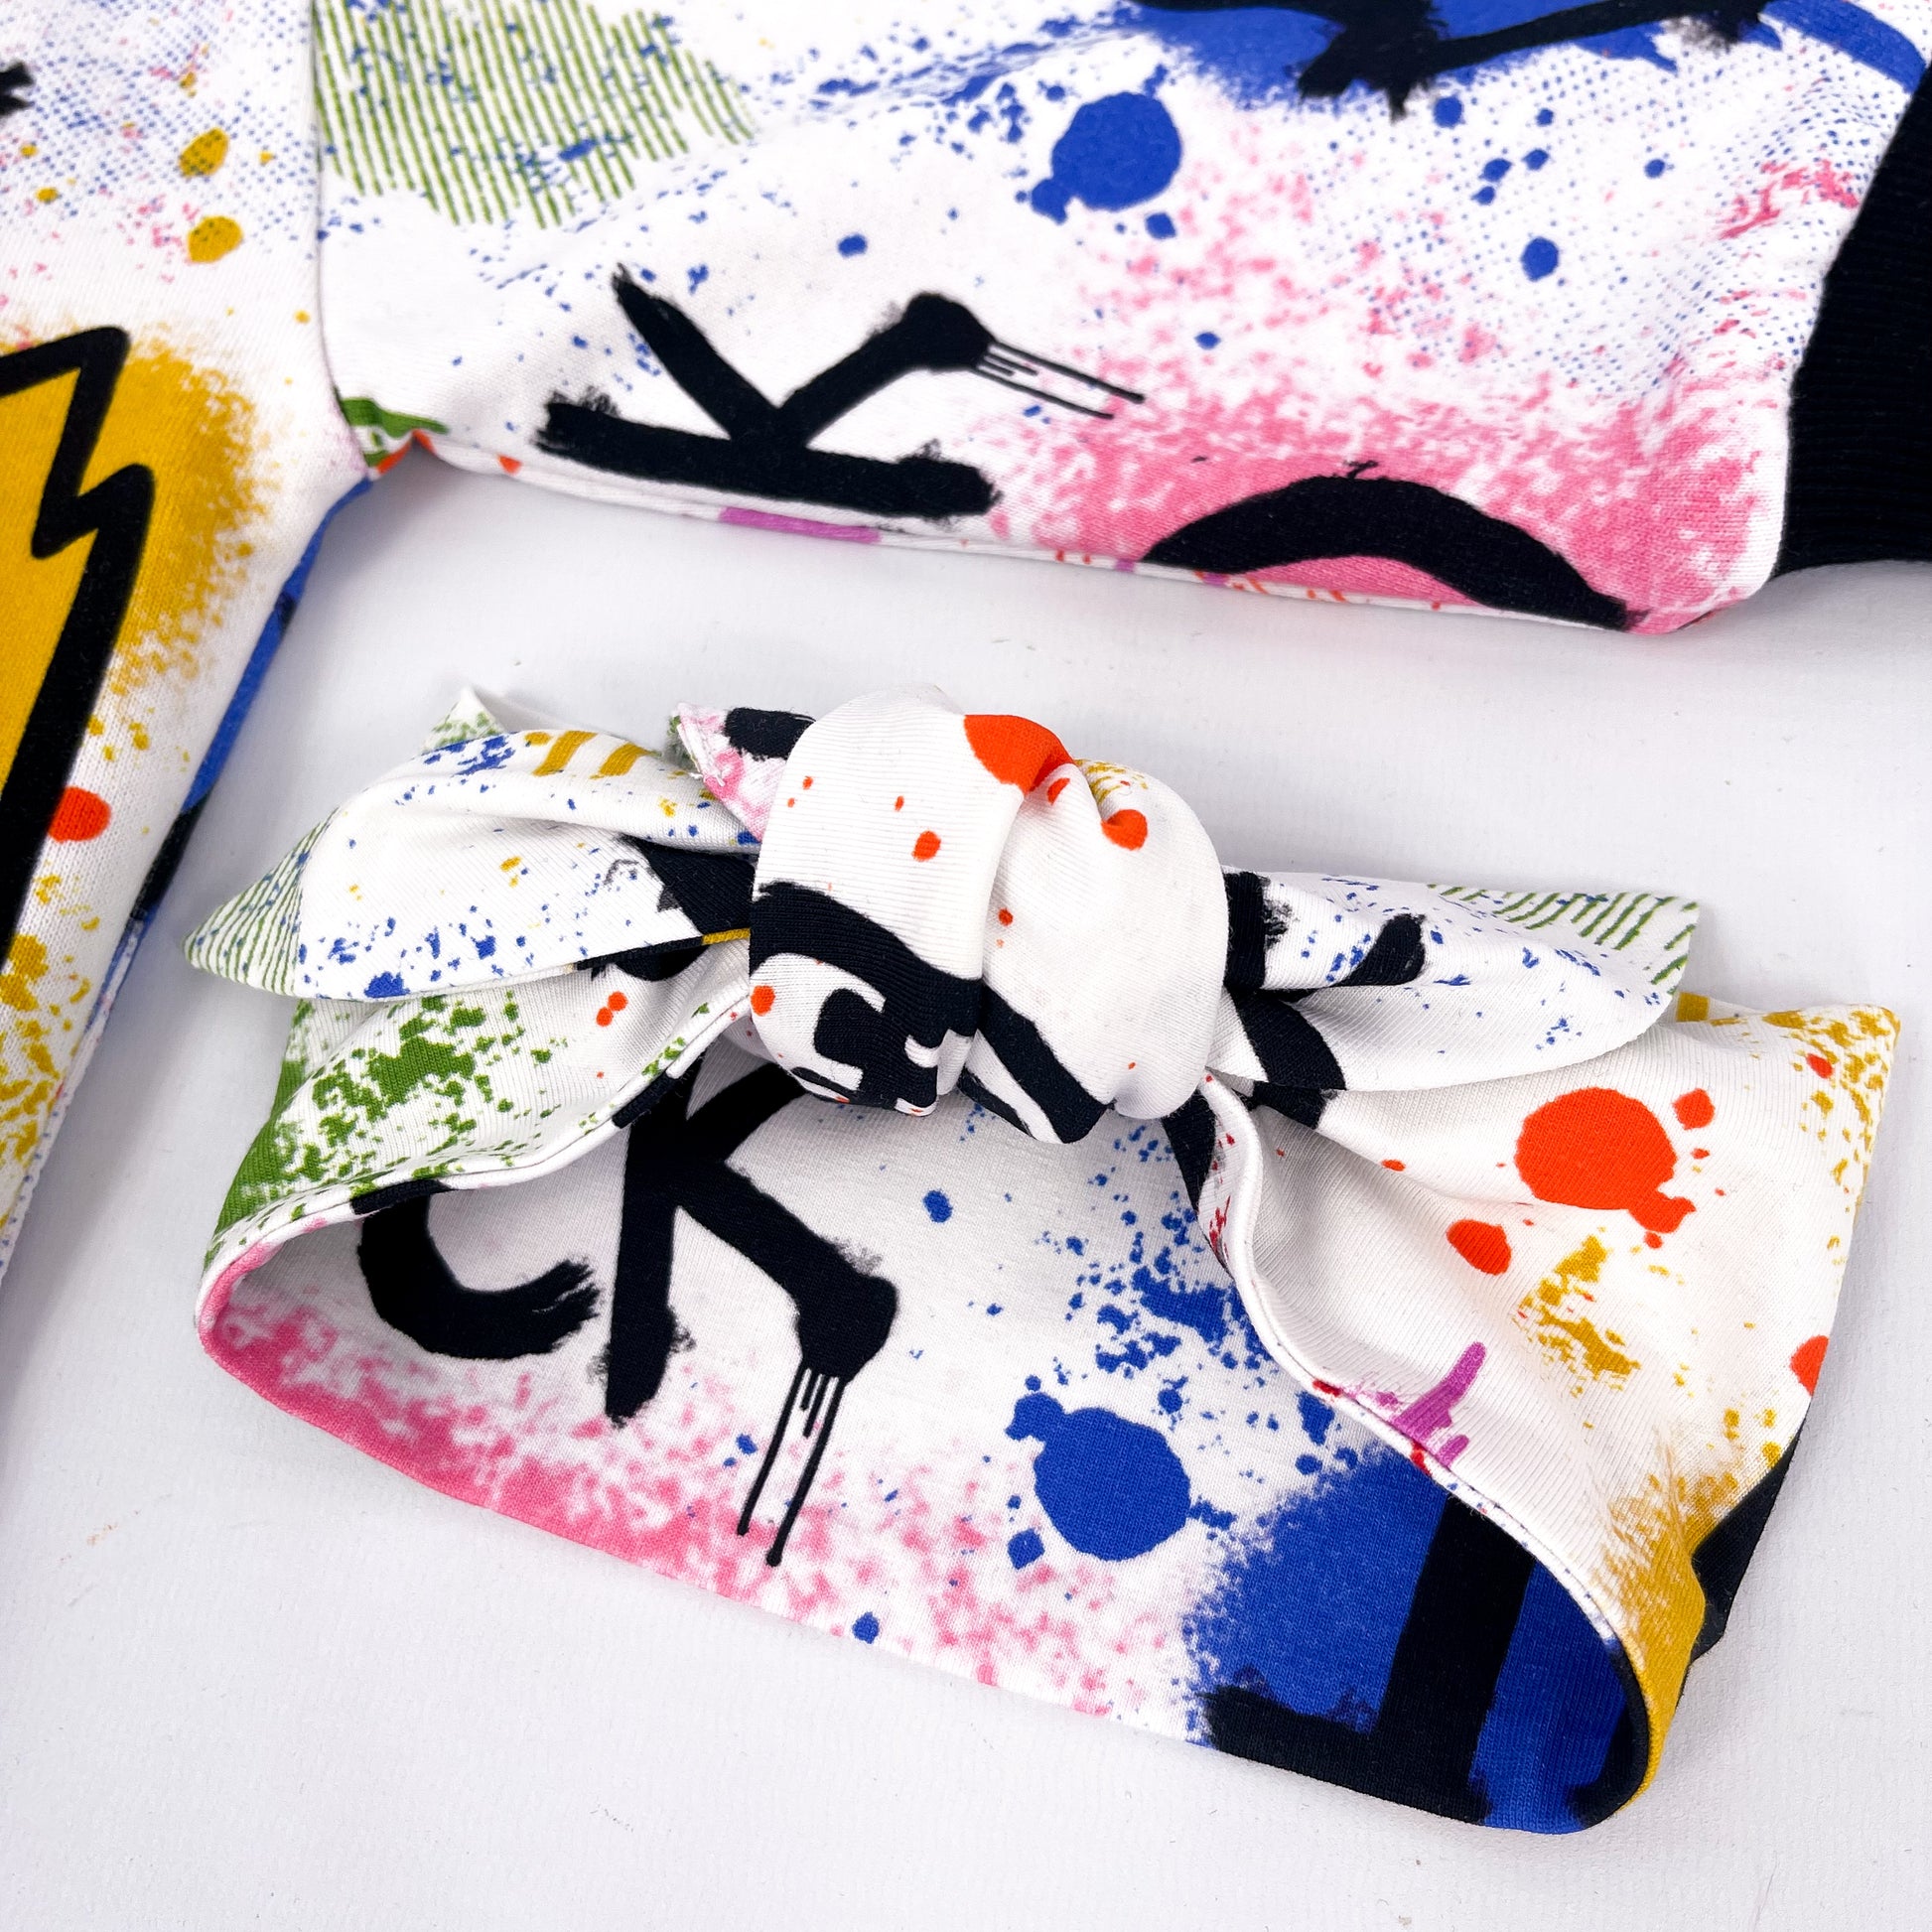 Stretchy headband with colourful paint splatter and graffiti print